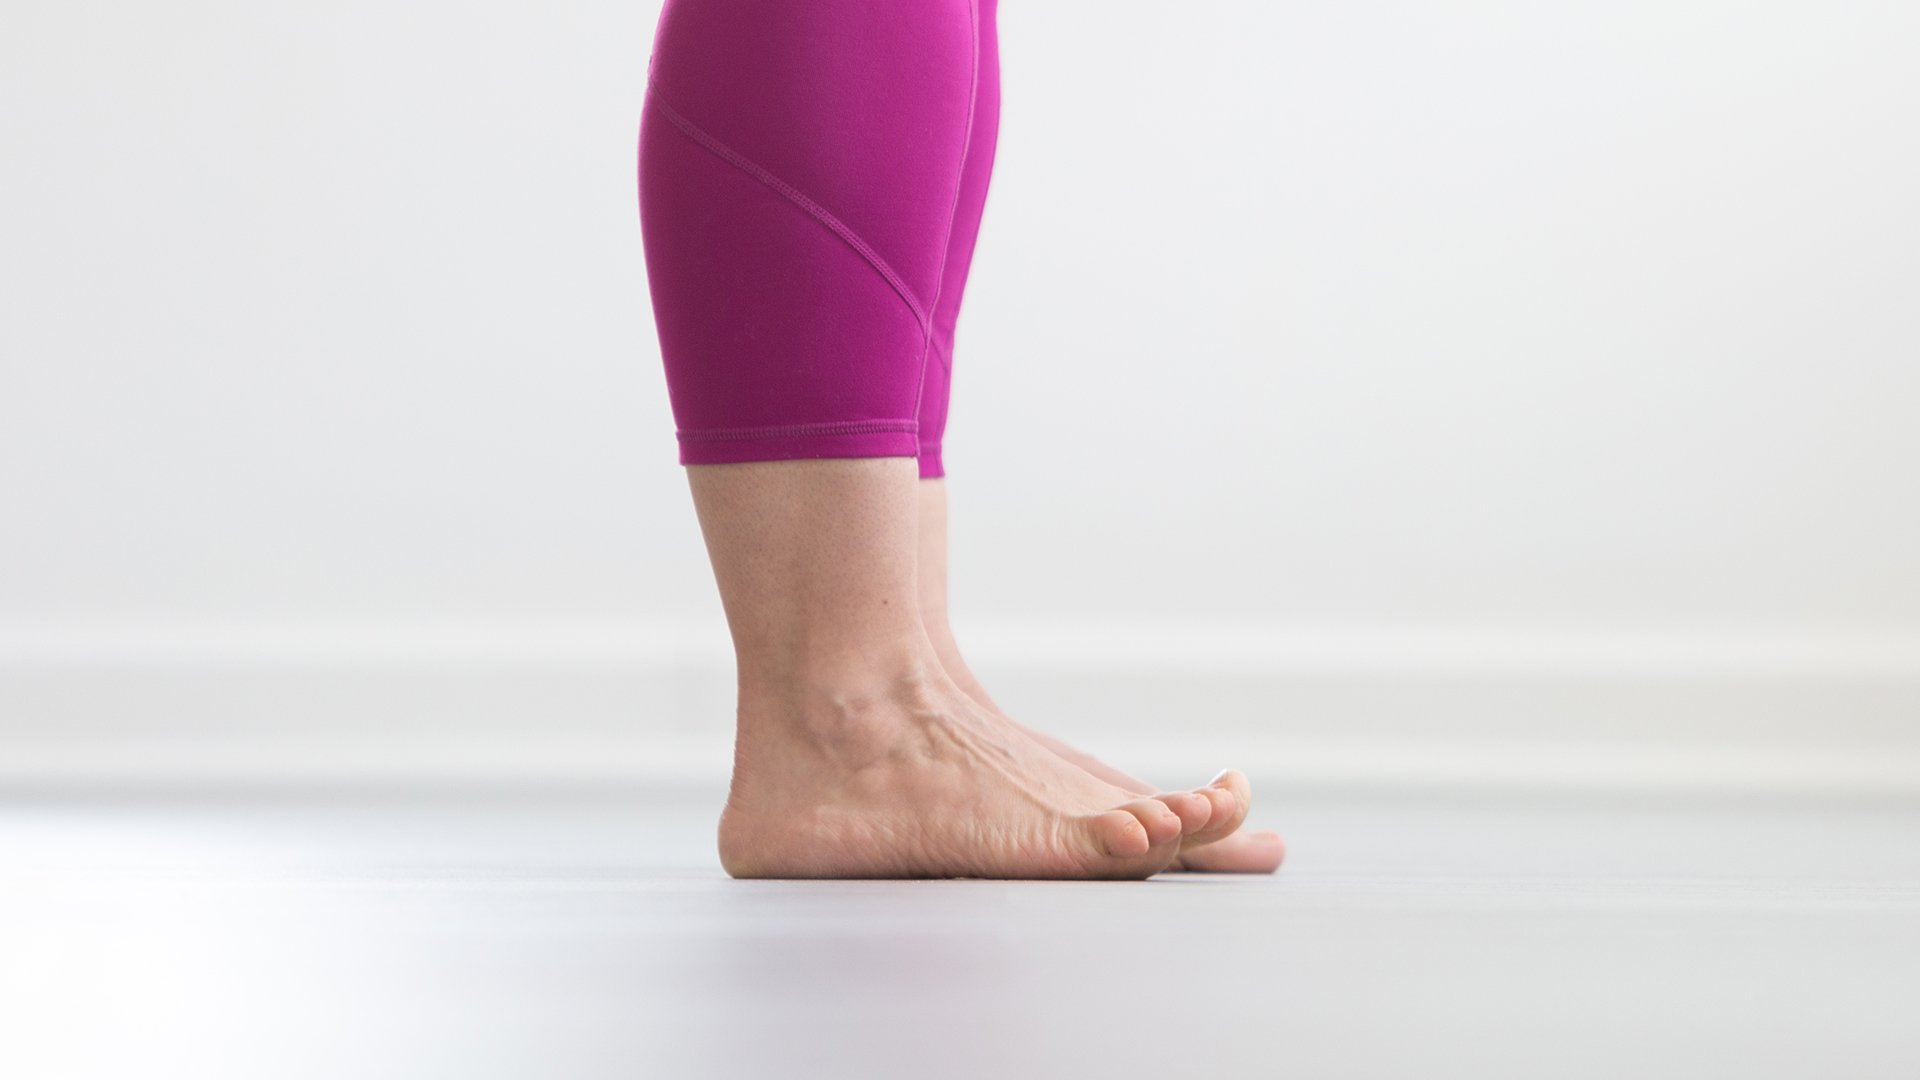 Yoga Poses May Help to Strengthen the Toes